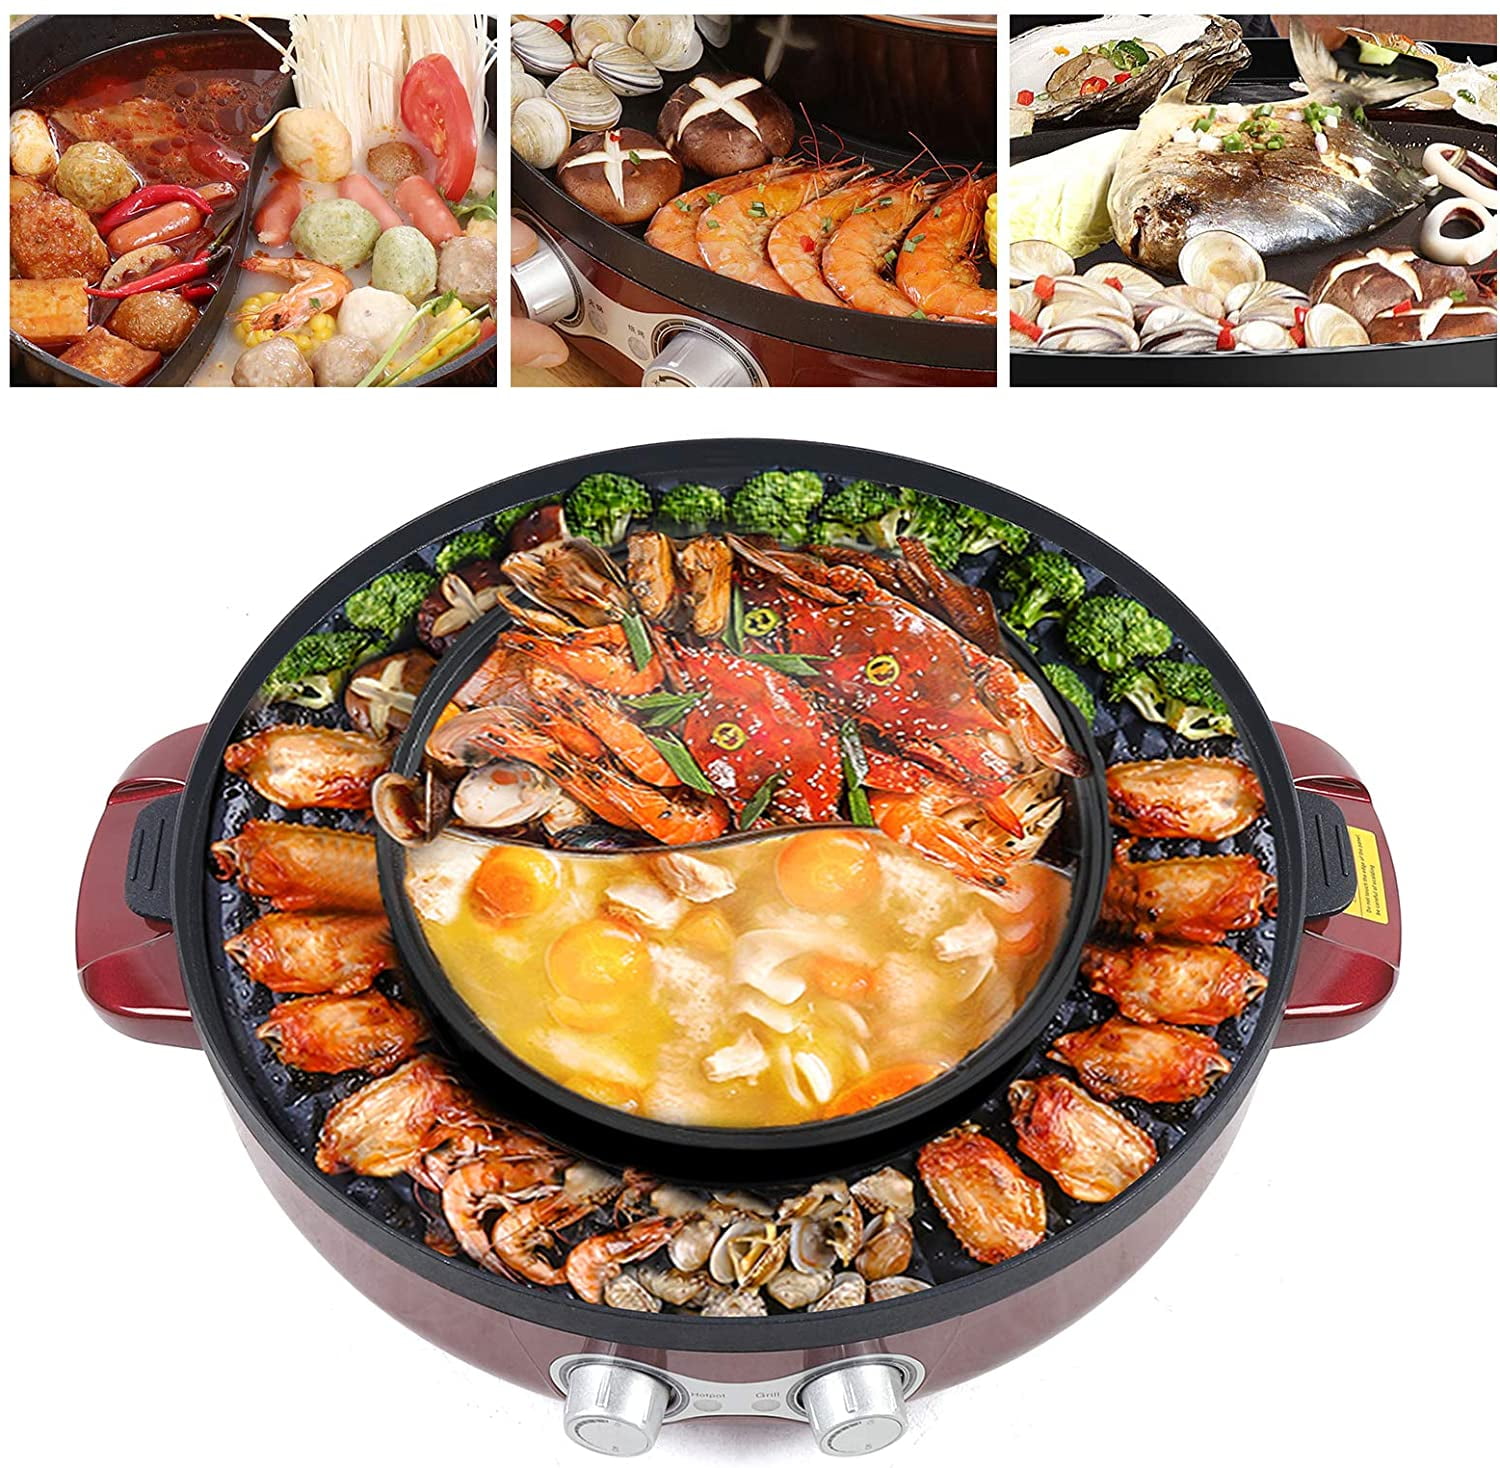 Multi-function Electric Grill Home Indoor Electric Baking Pan Smokeless  Teppanyaki BBQ Barbecue 220V